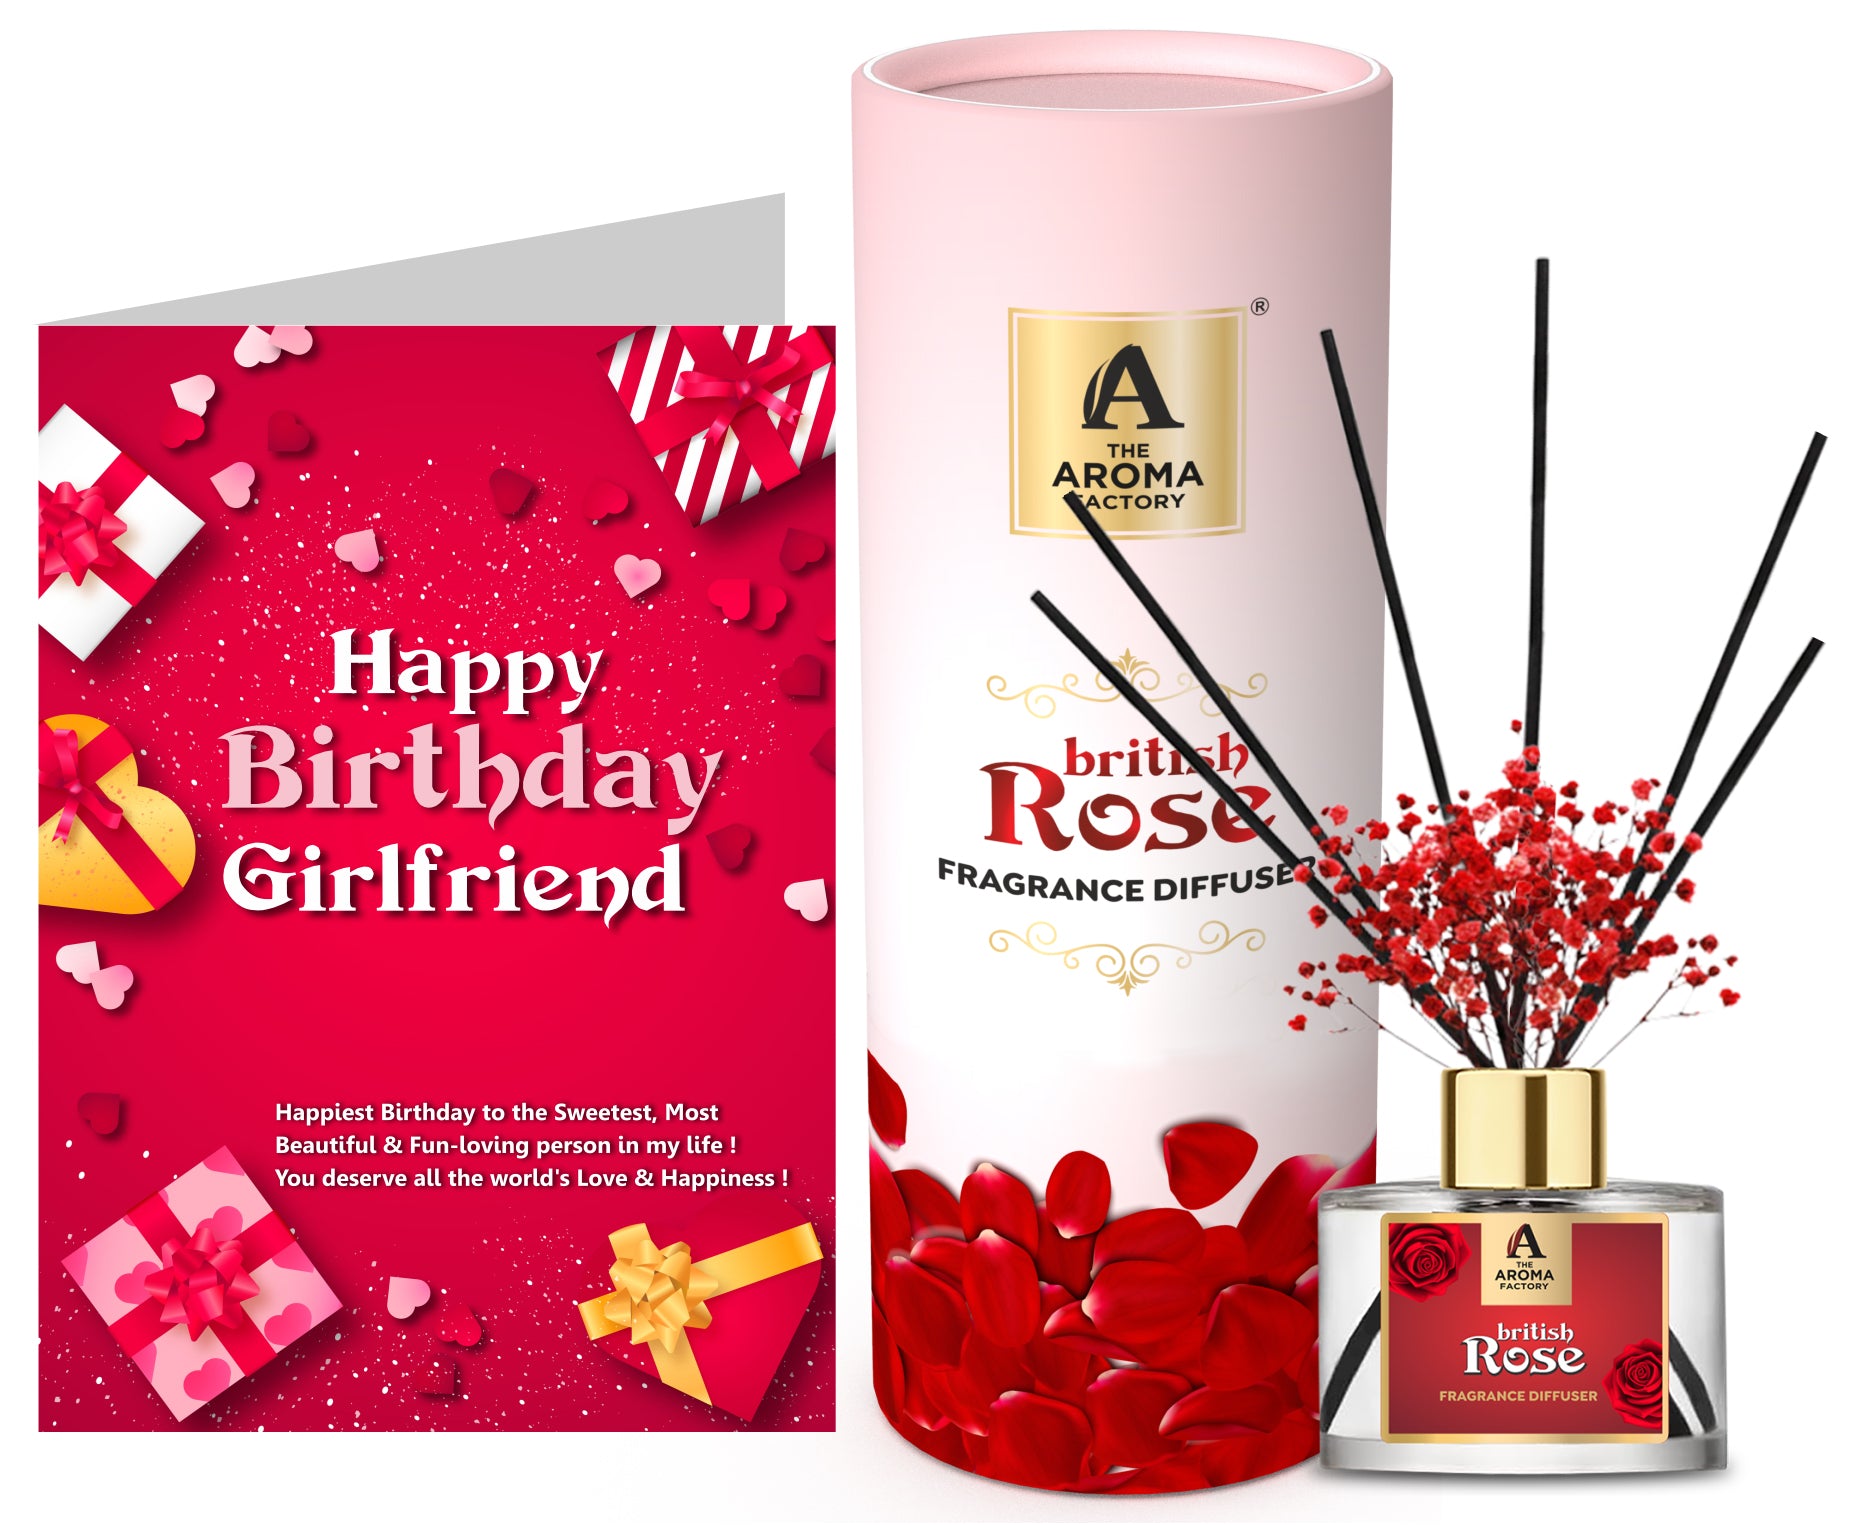 The Aroma Factory Happy Birthday Girl Friend Gift with Card, British Rose Fragrance Reed Diffuser Set (1 Box + 1 Card)